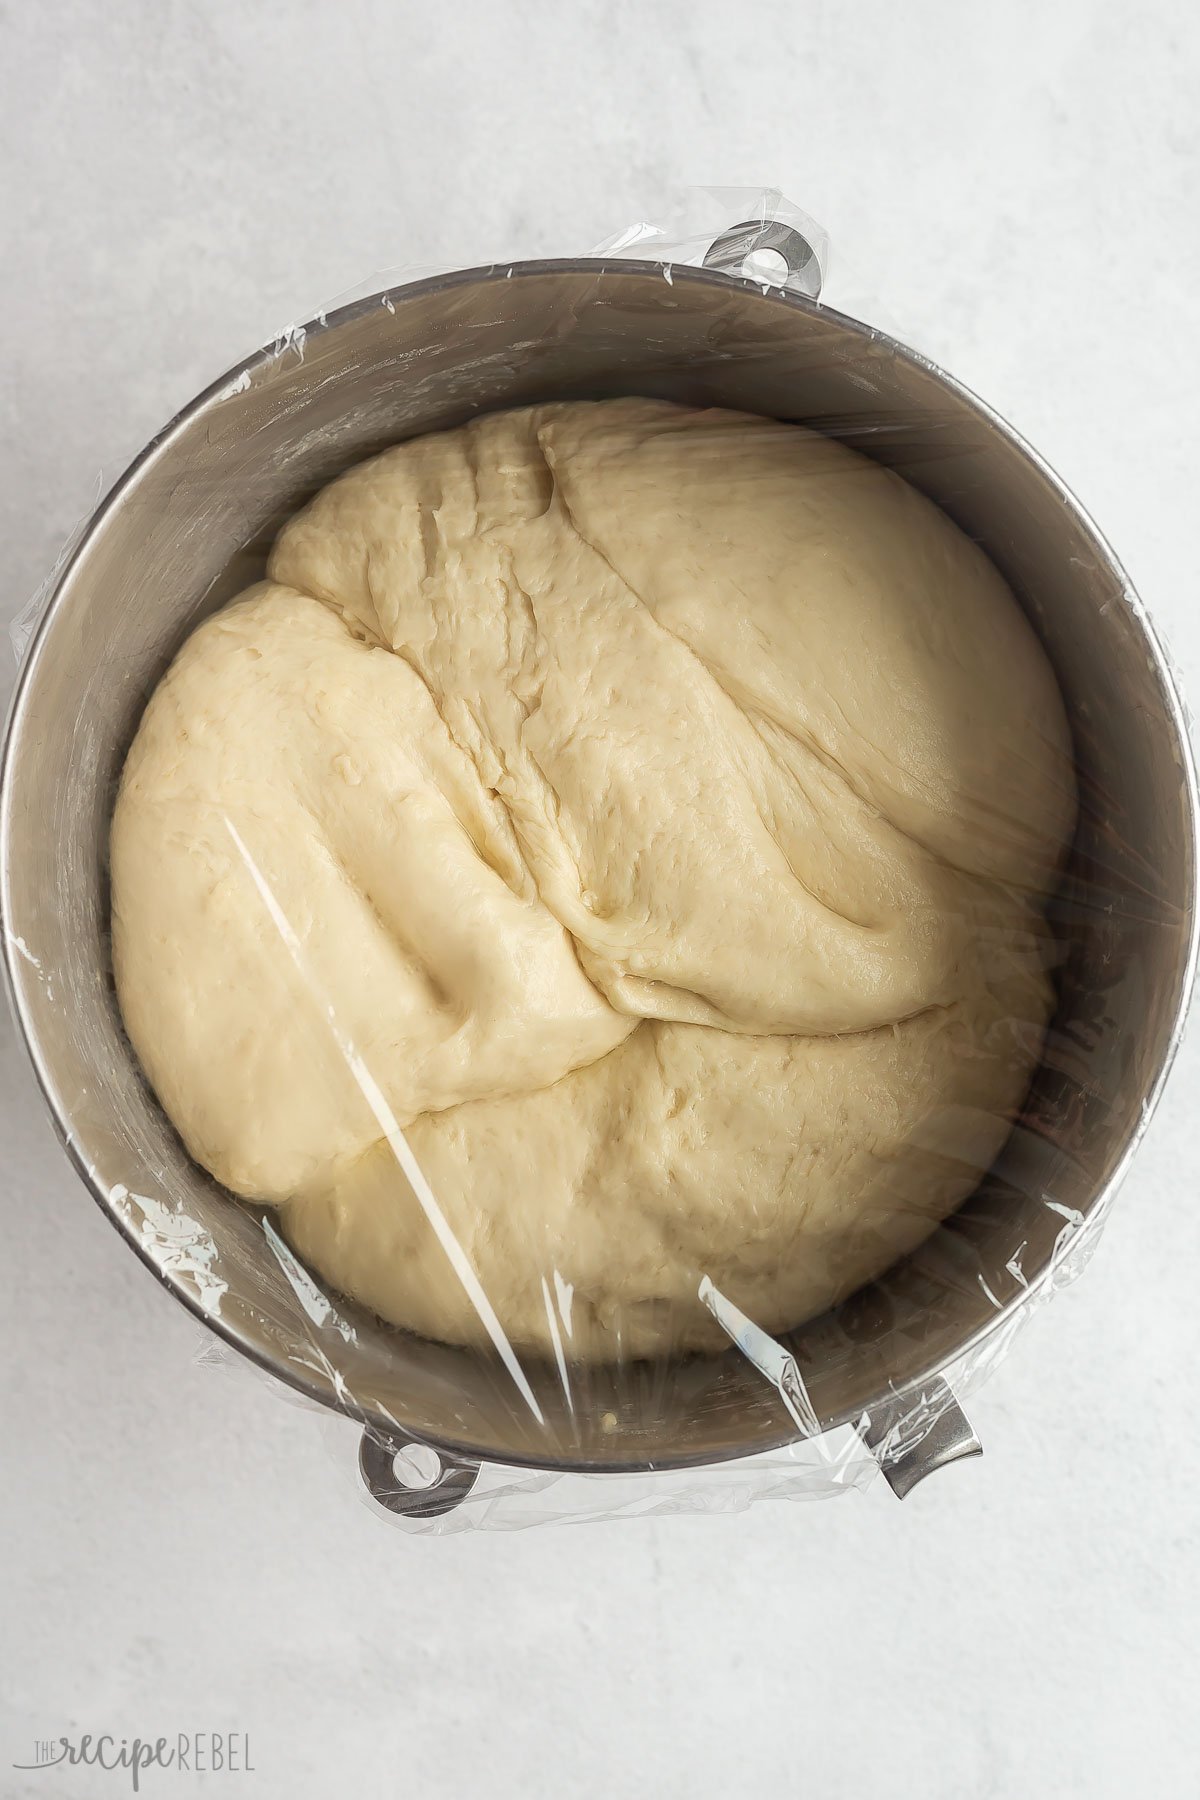 hamburger bun dough in steel mixing bowl with plastic wrap after rising